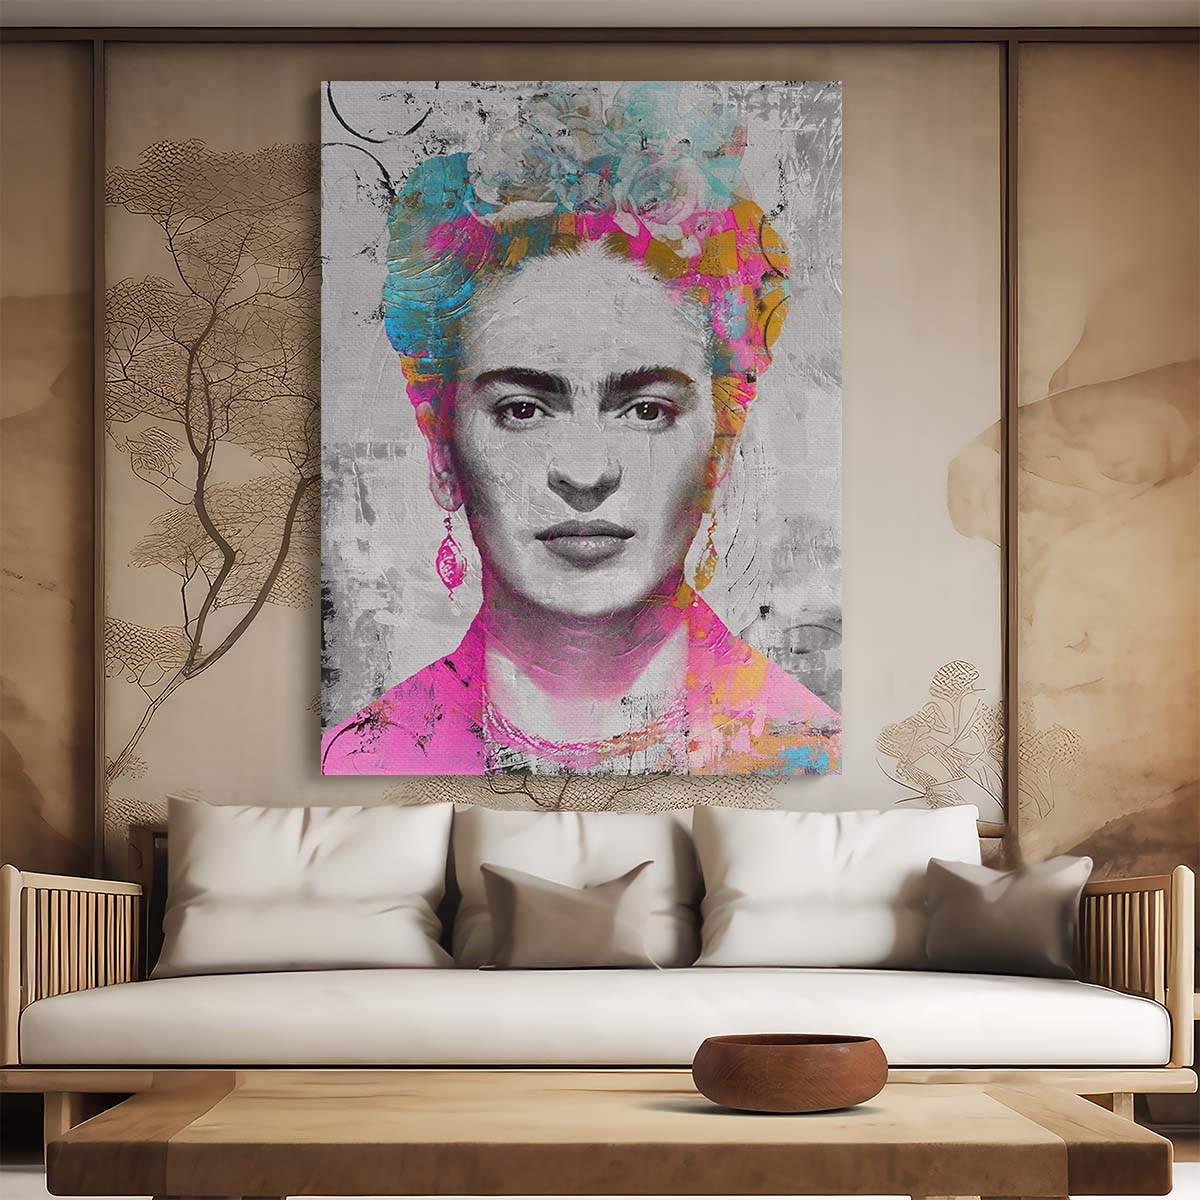 Frida Kahlo Portrait Grey Circles Wall Art by Luxuriance Designs. Made in USA.